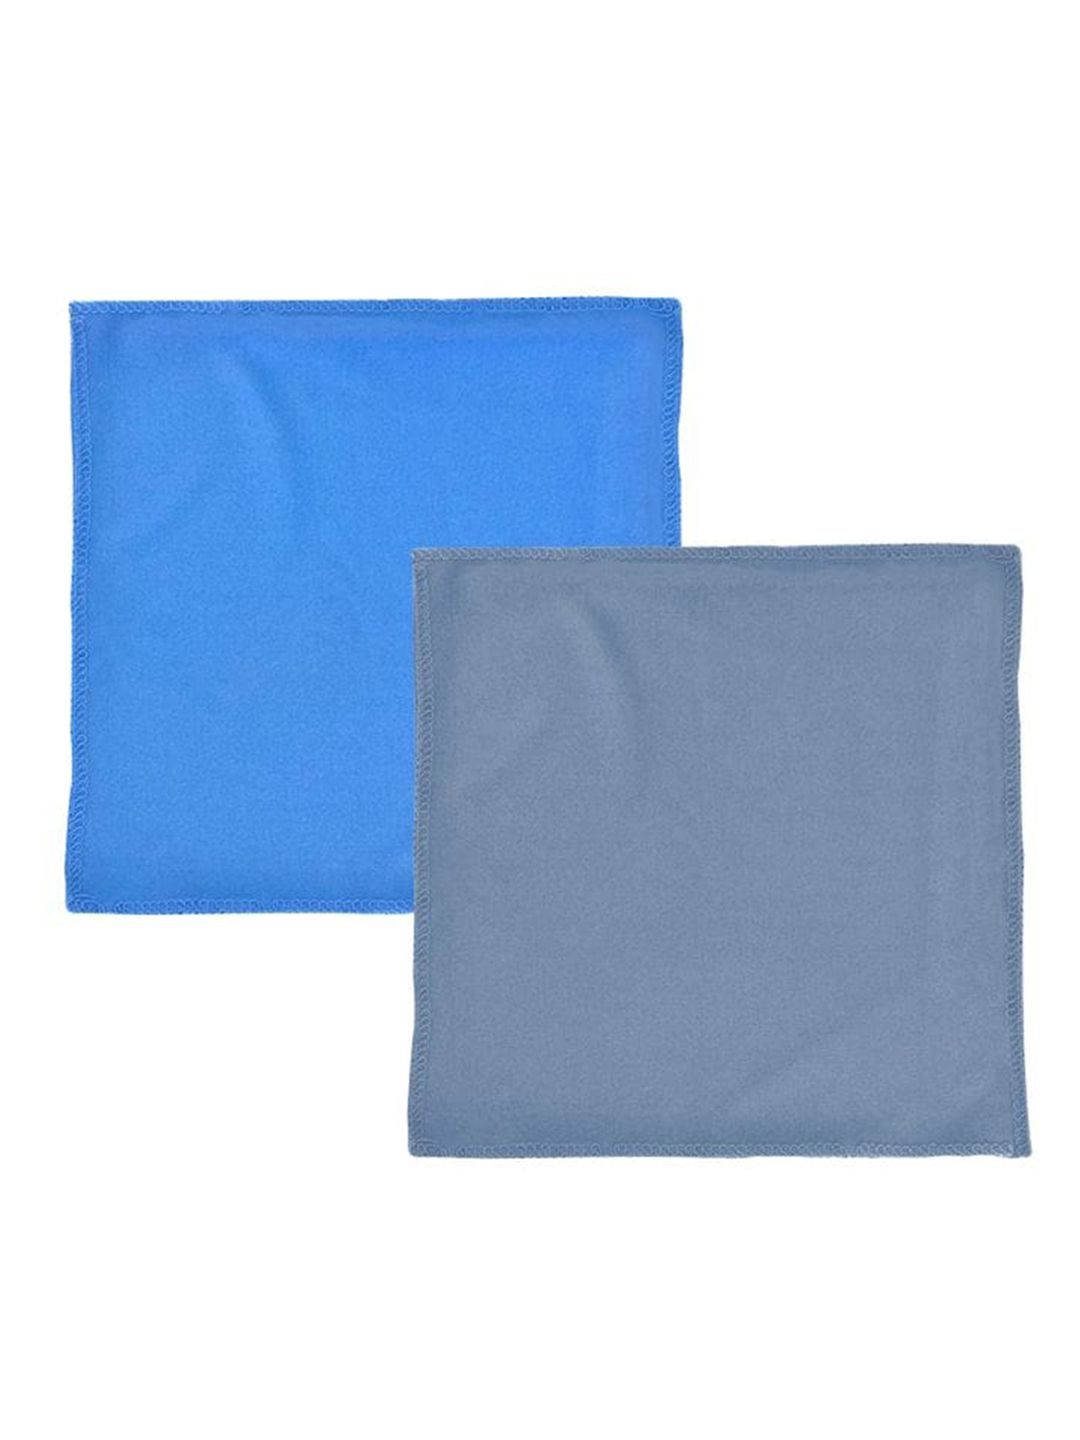 Kawach Set of 4 210 GSM Microfiber Cleaning Towels Price in India